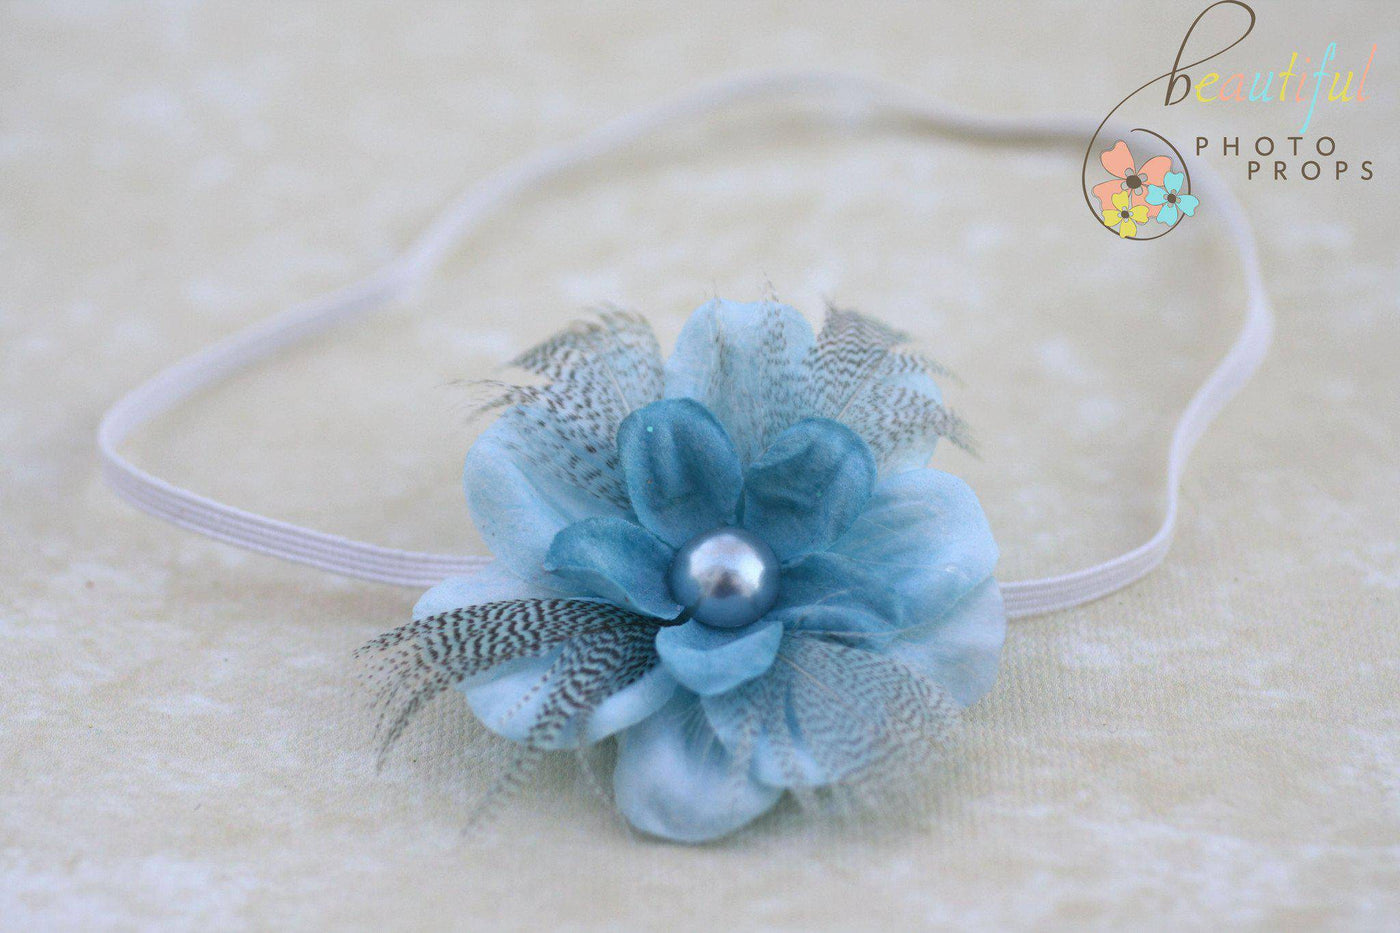 Blue Pearl Feather Flower Headband - Beautiful Photo Props